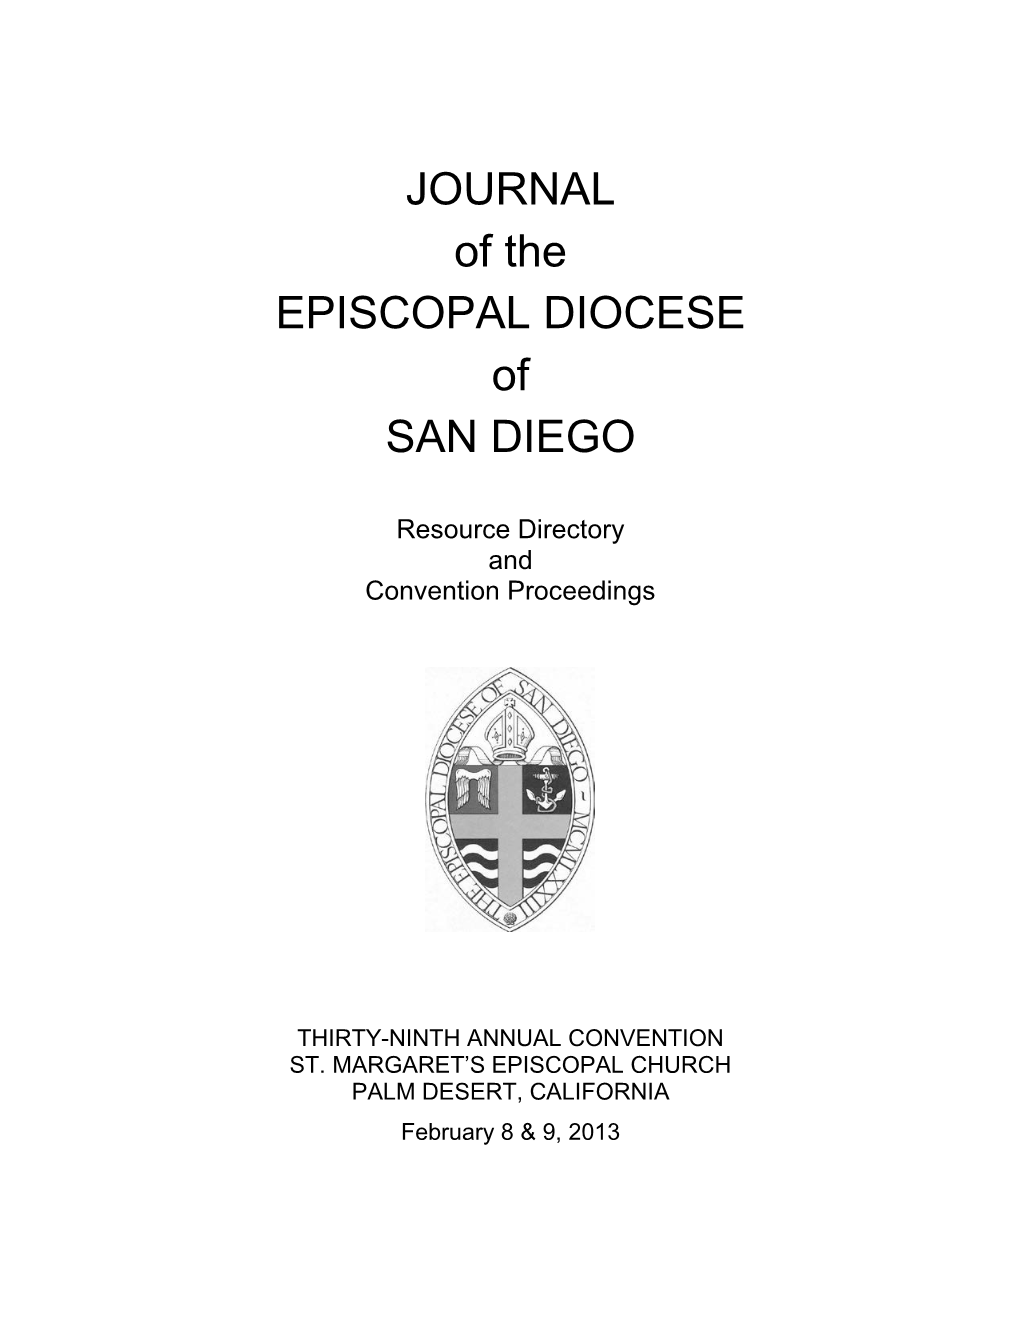 JOURNAL of the EPISCOPAL DIOCESE of SAN DIEGO